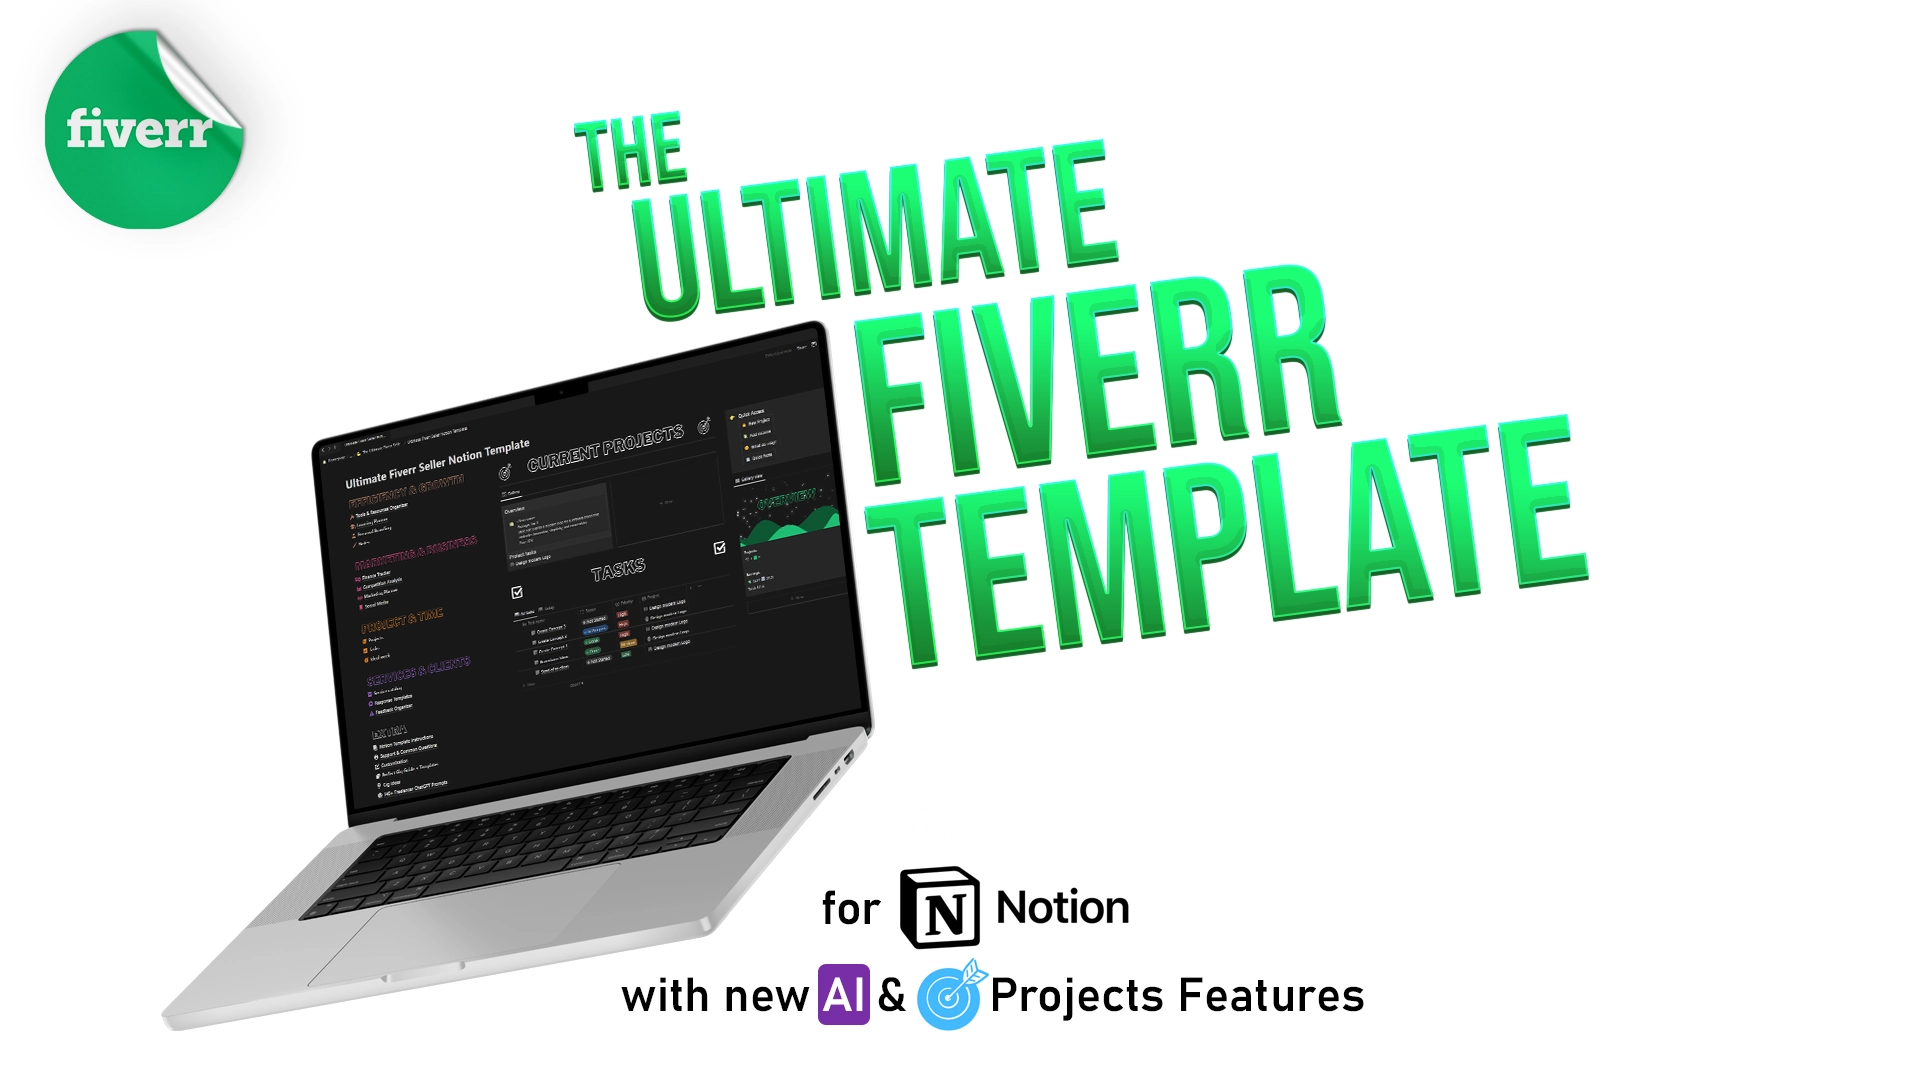 The Ultimate Fiverr Seller Notion Template